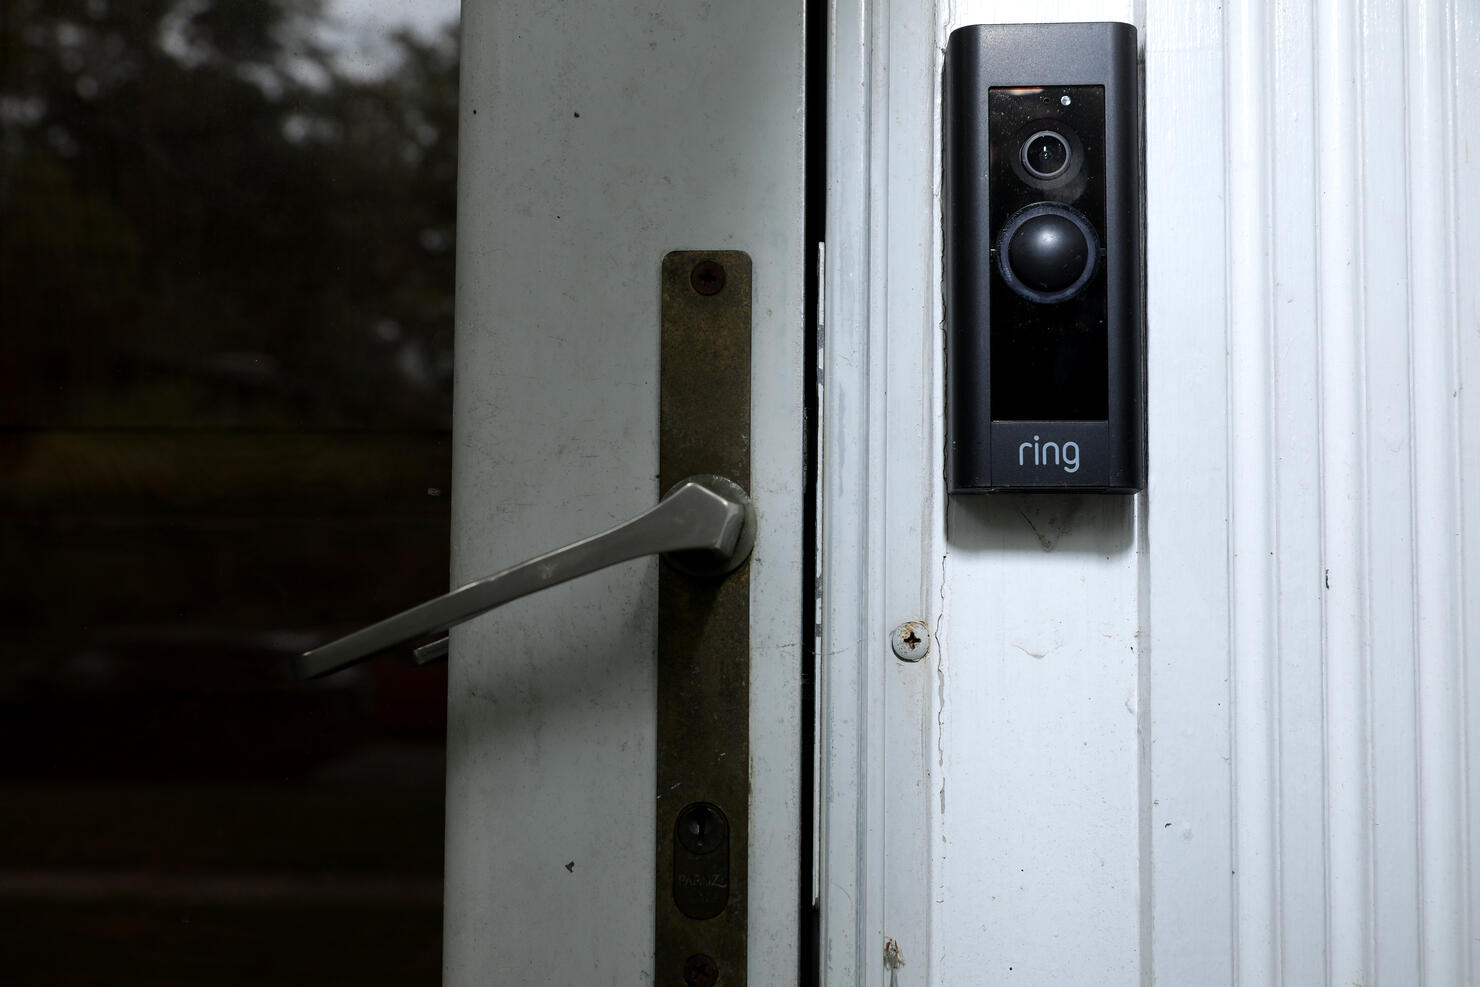 Doorbell-Camera Company Ring Partners With Over 400 Police Departments, Raising Surveillance Concerns